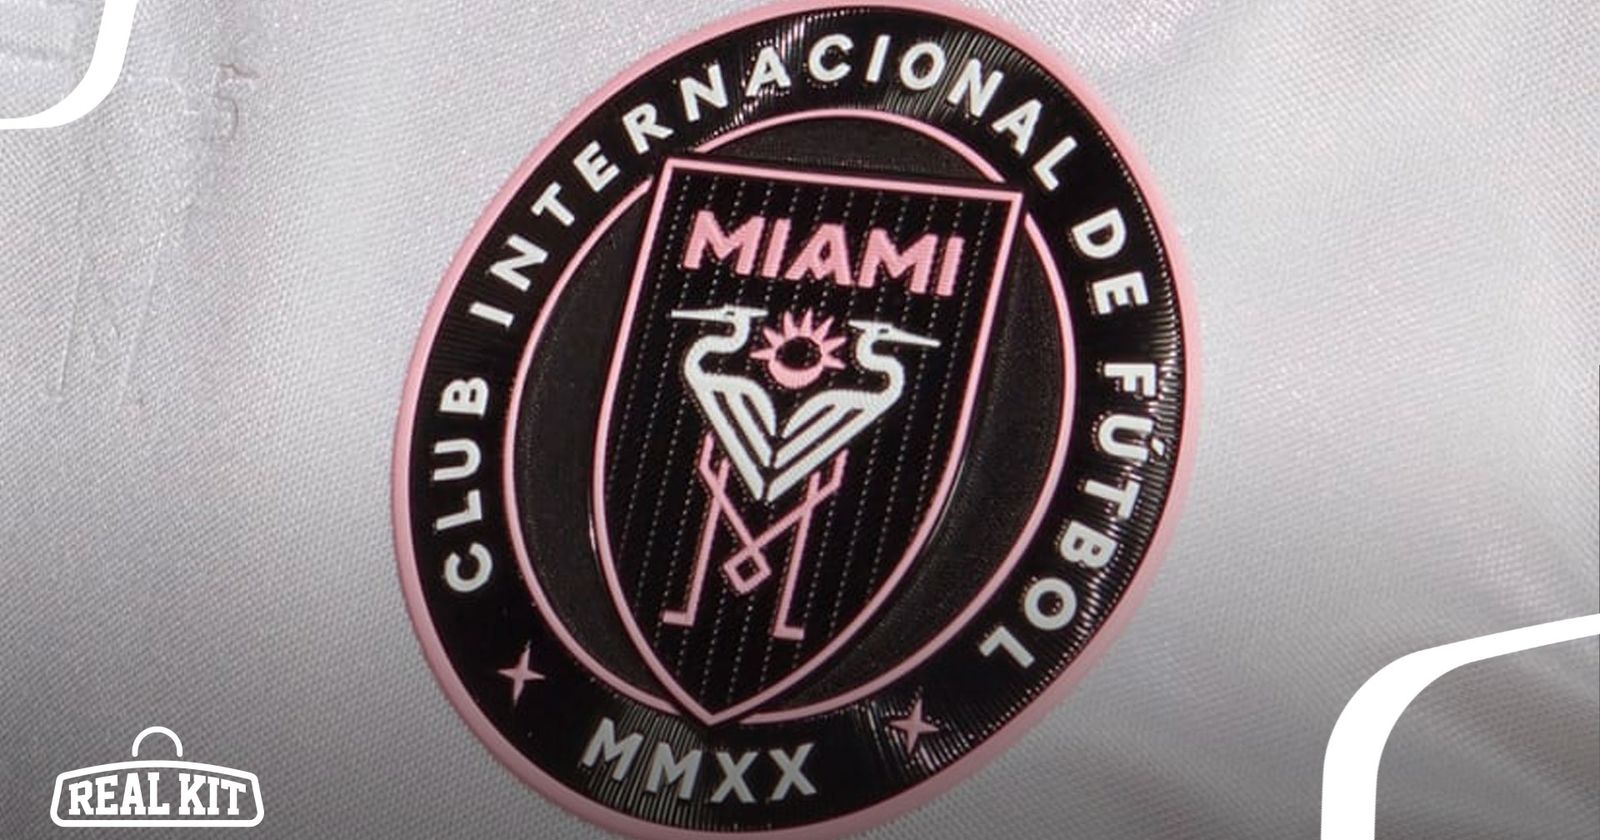 Inter Miami CF Confirms Squad Numbers for 2021 Season